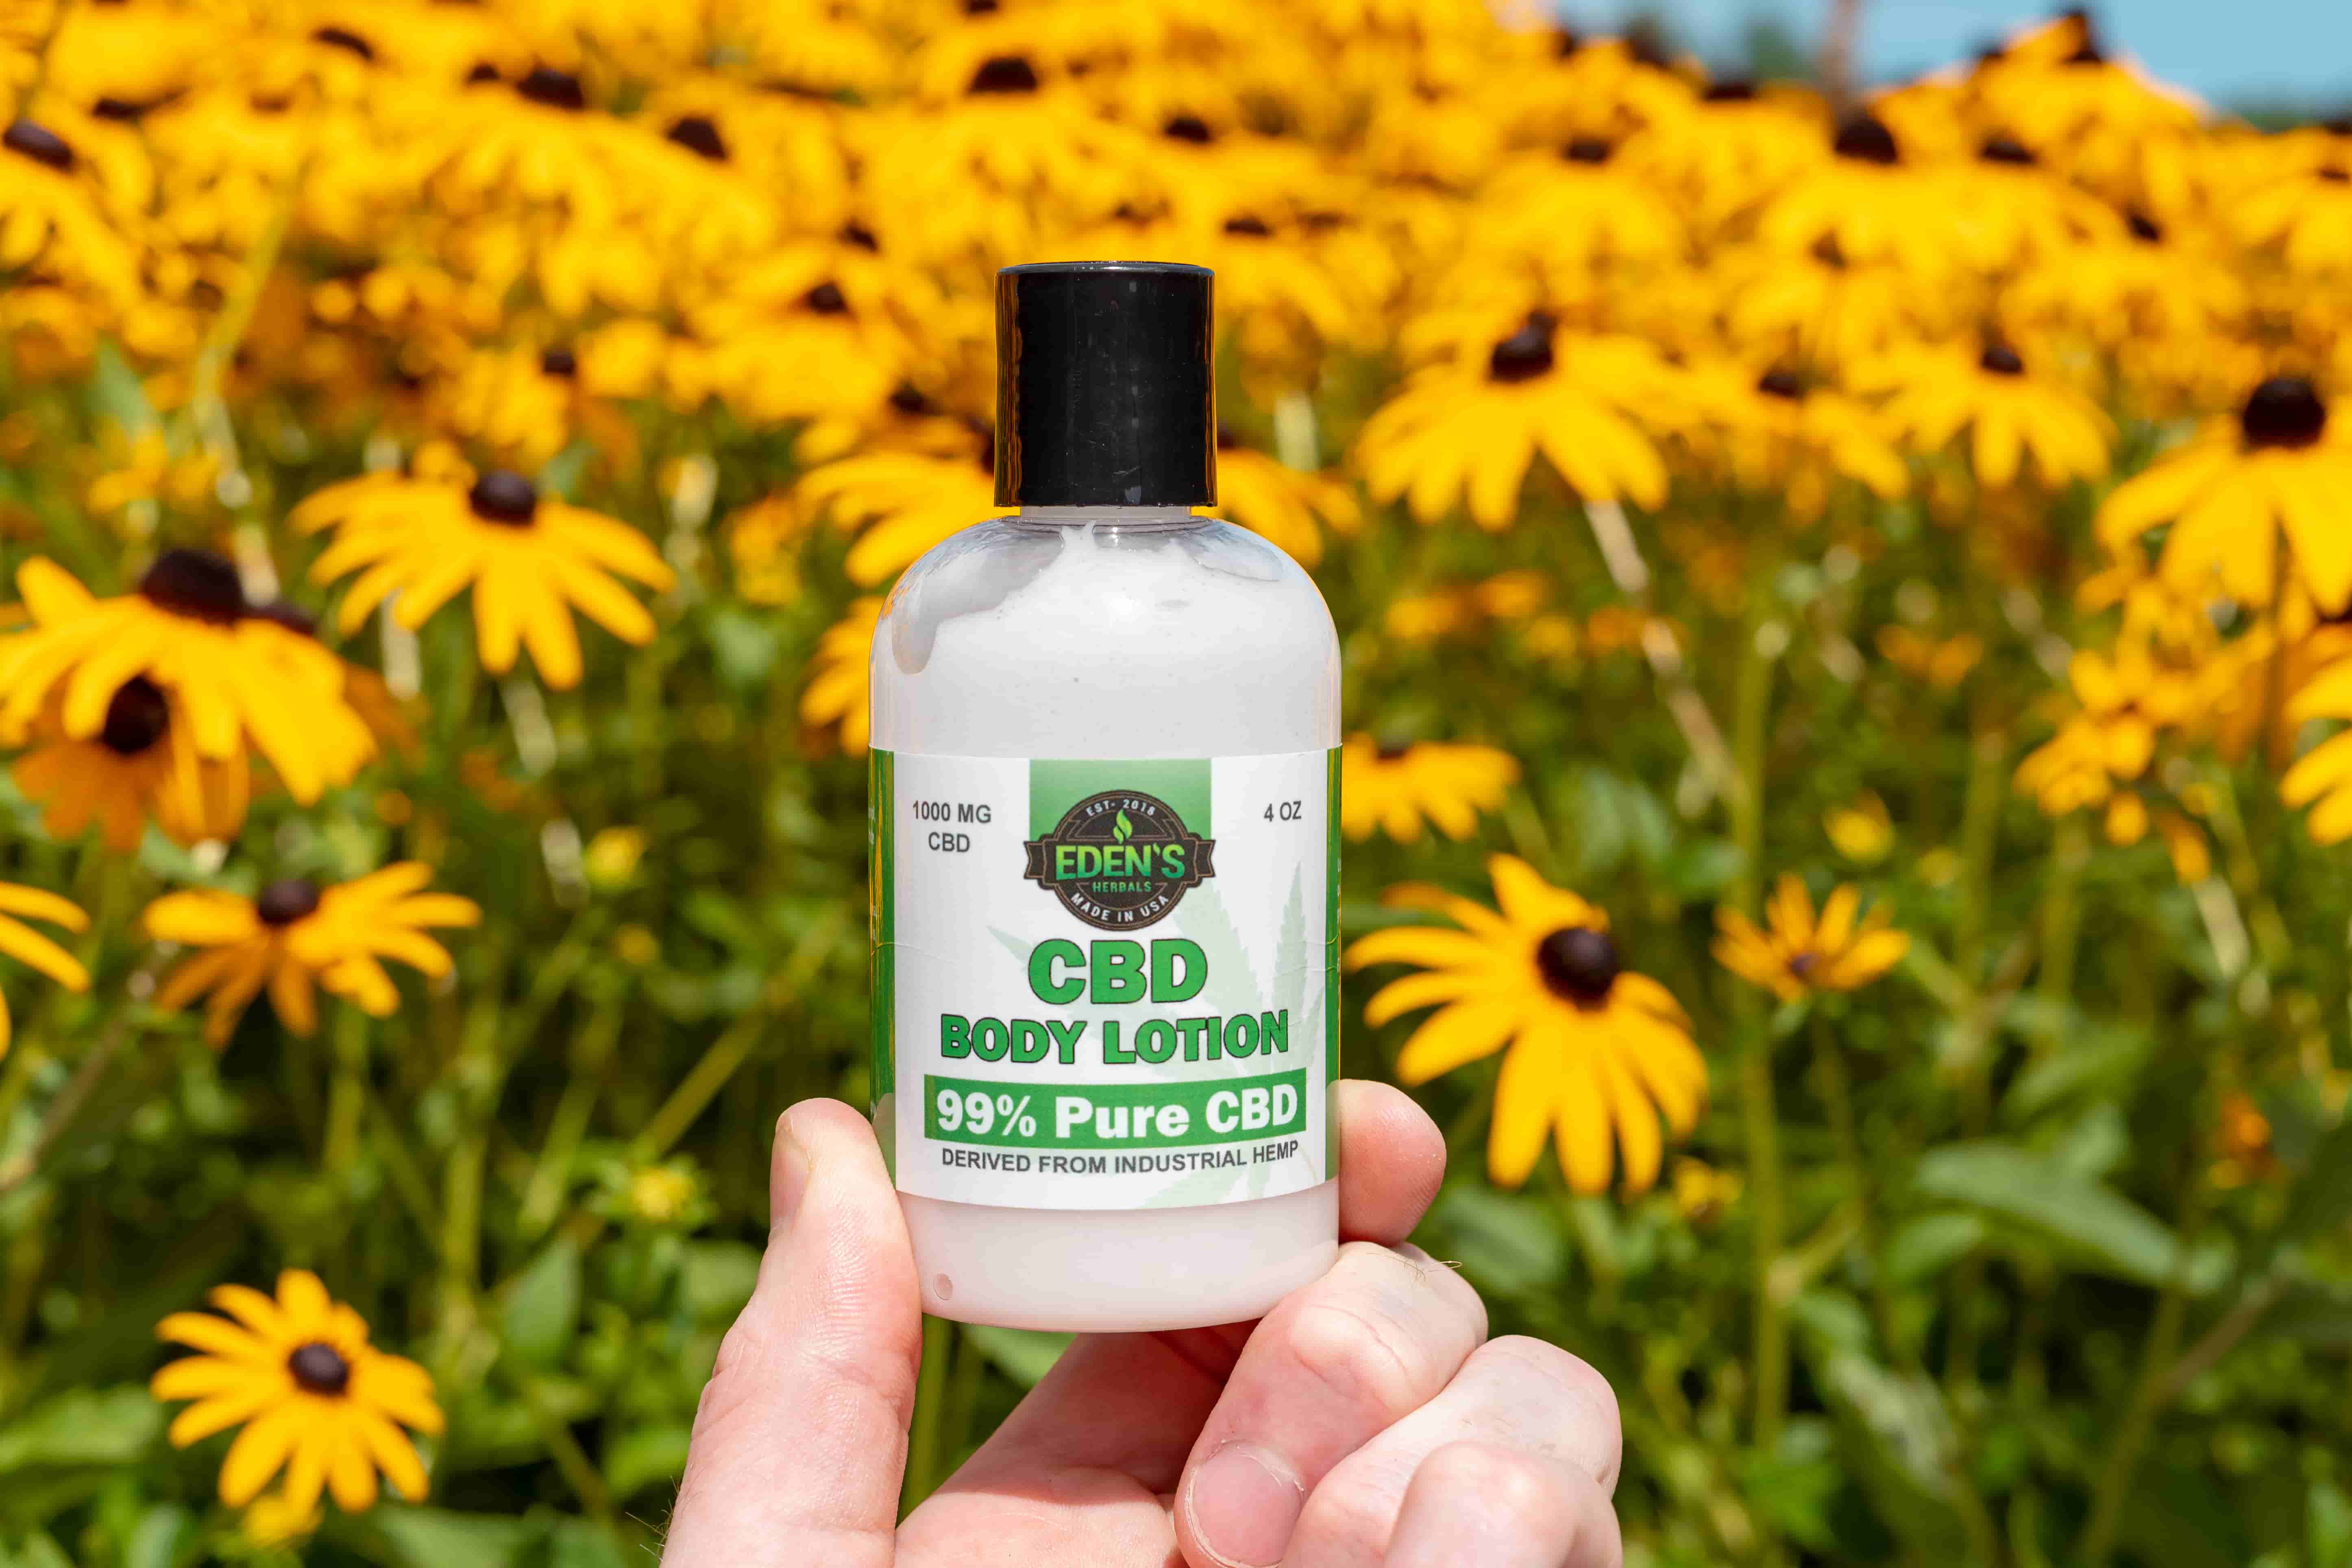 Eden's Herbals CBD Body Lotion being held up in front of a field of flowers